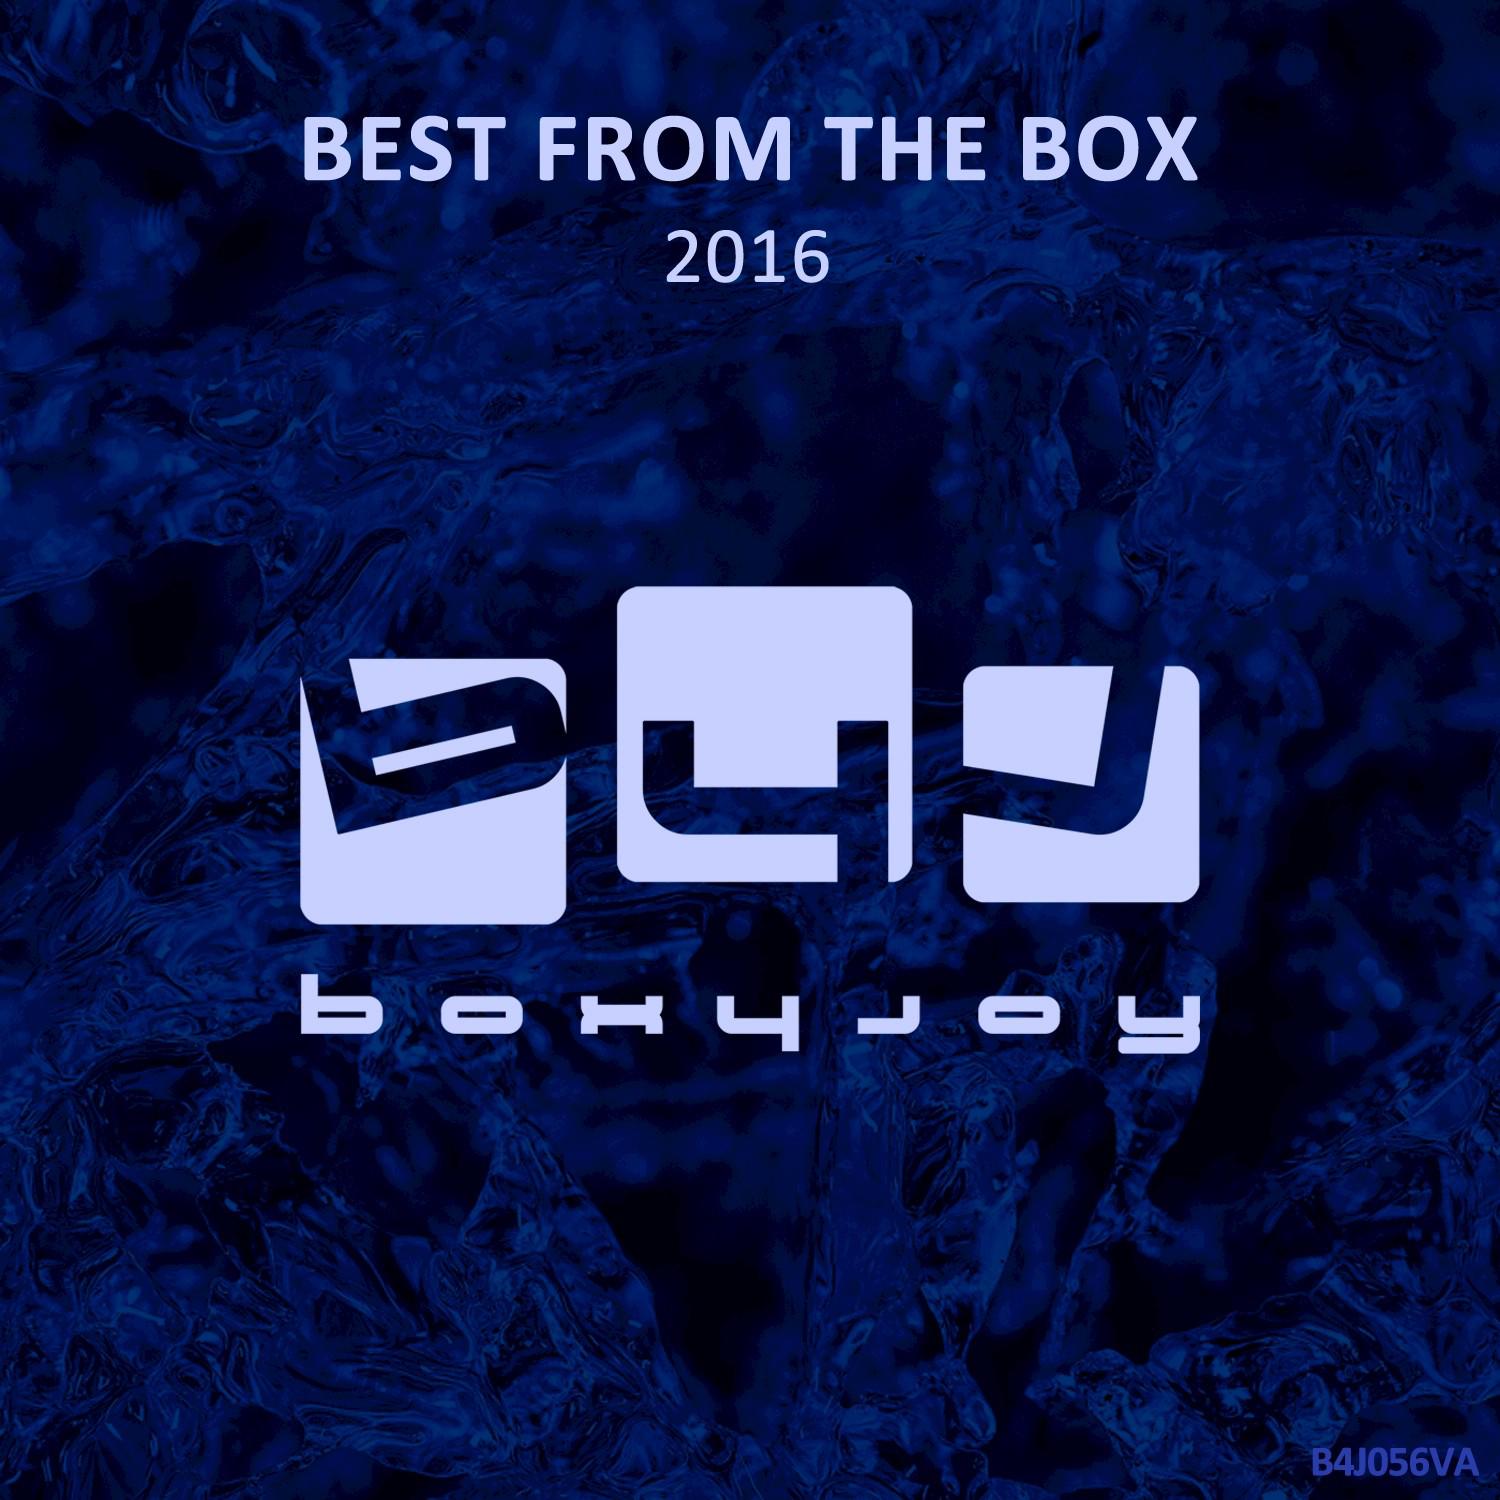 Best from the Box 2016